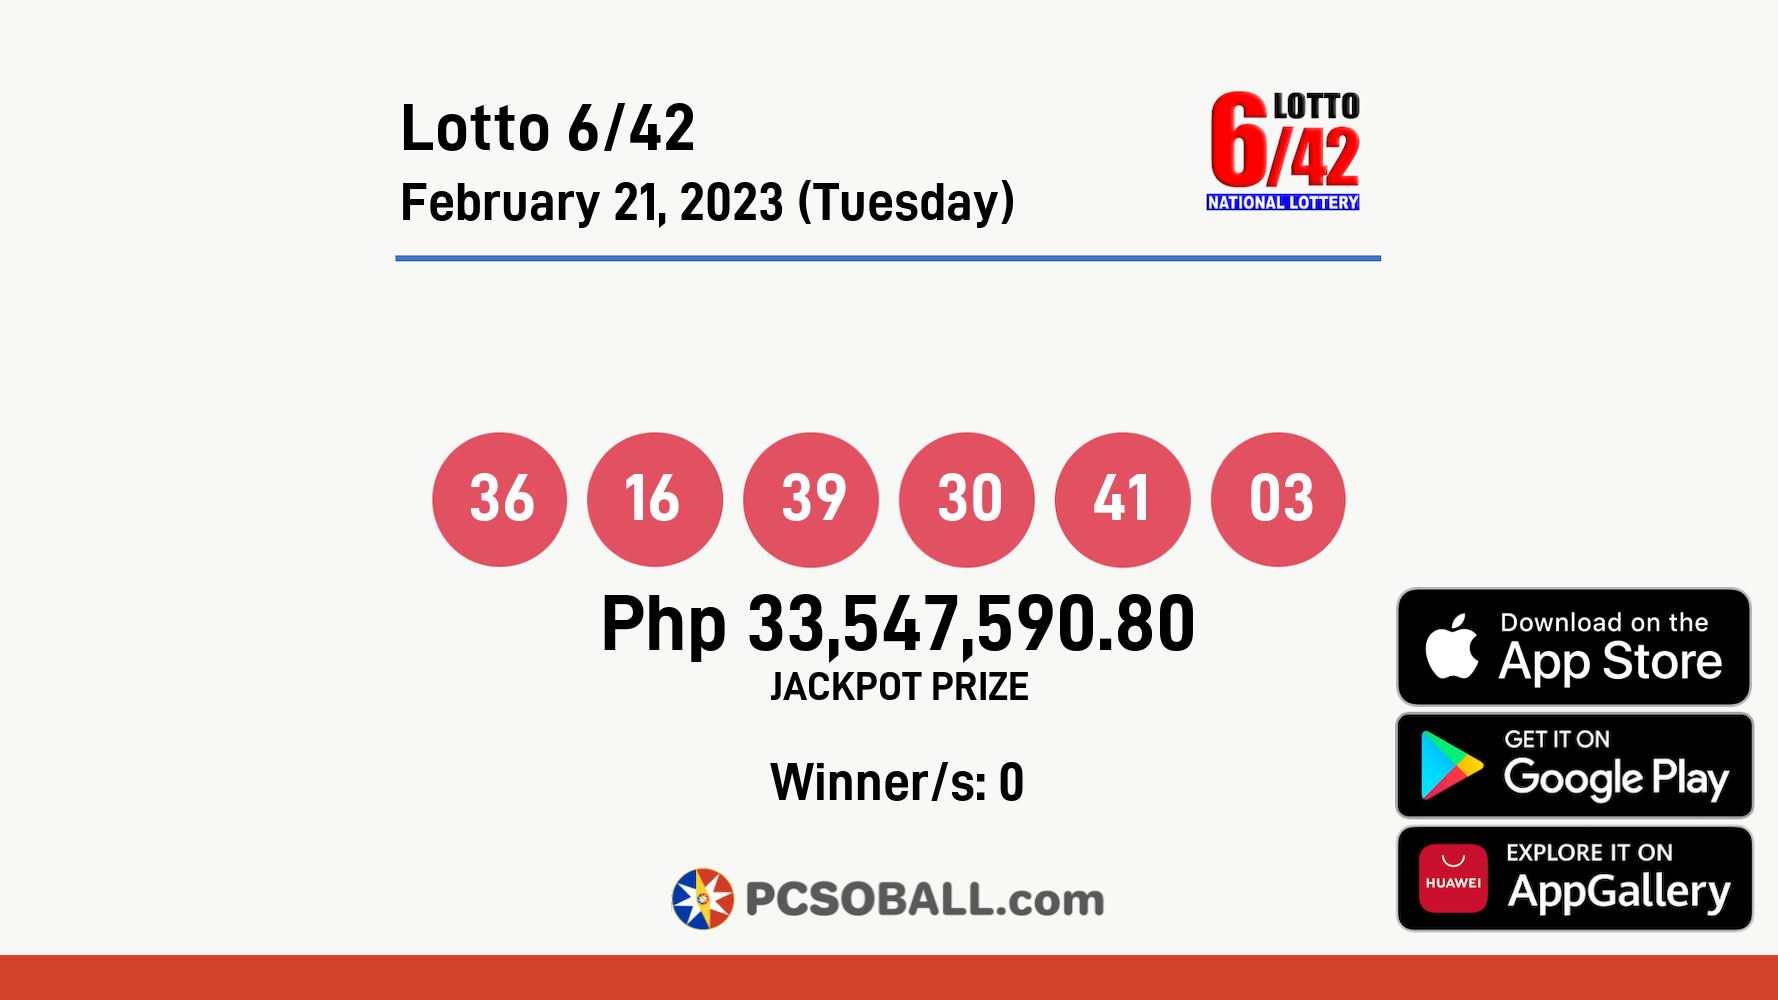 Lotto 6/42 February 21, 2023 (Tuesday) Result